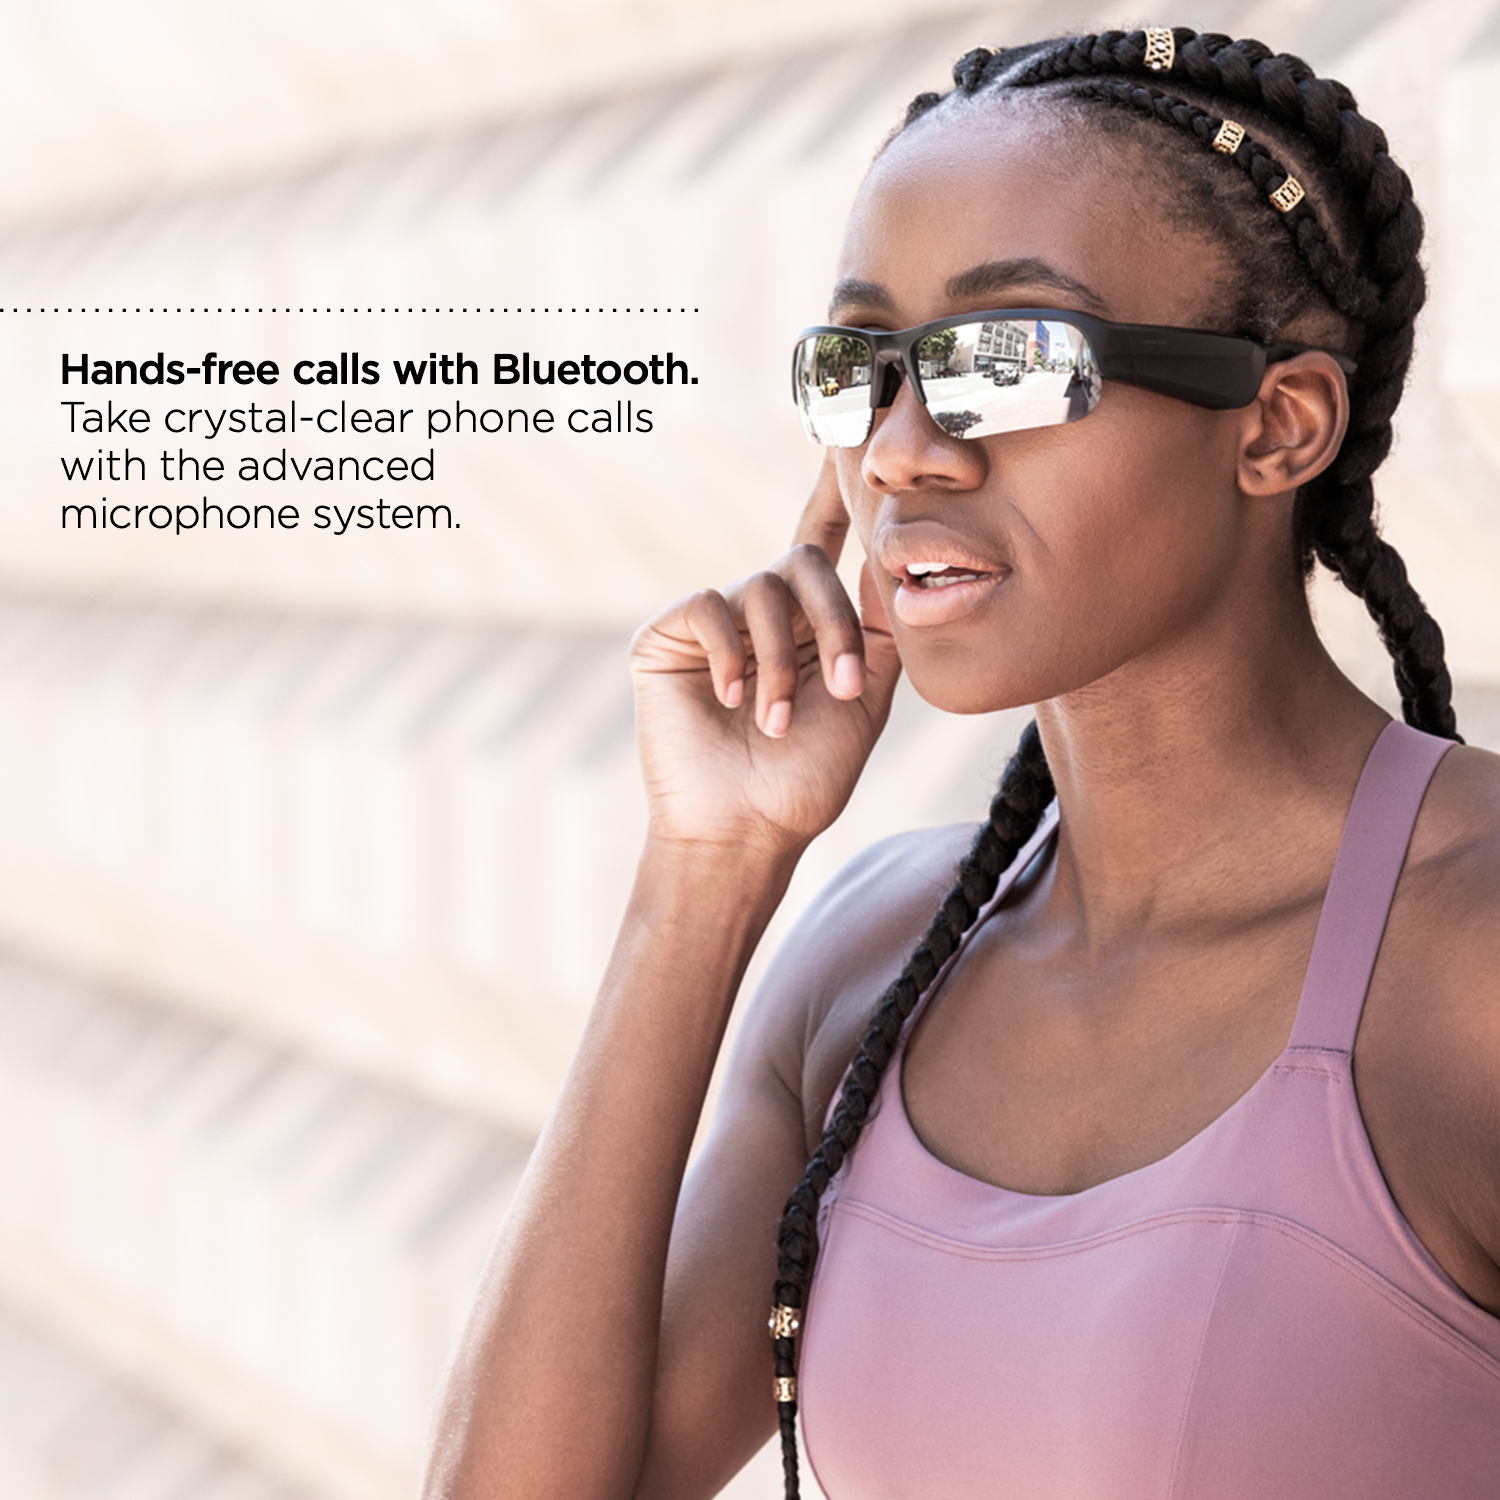 Bose Frames Tempo Bluetooth Sports Sunglasses with Polarized Lenses, Black - image 6 of 13